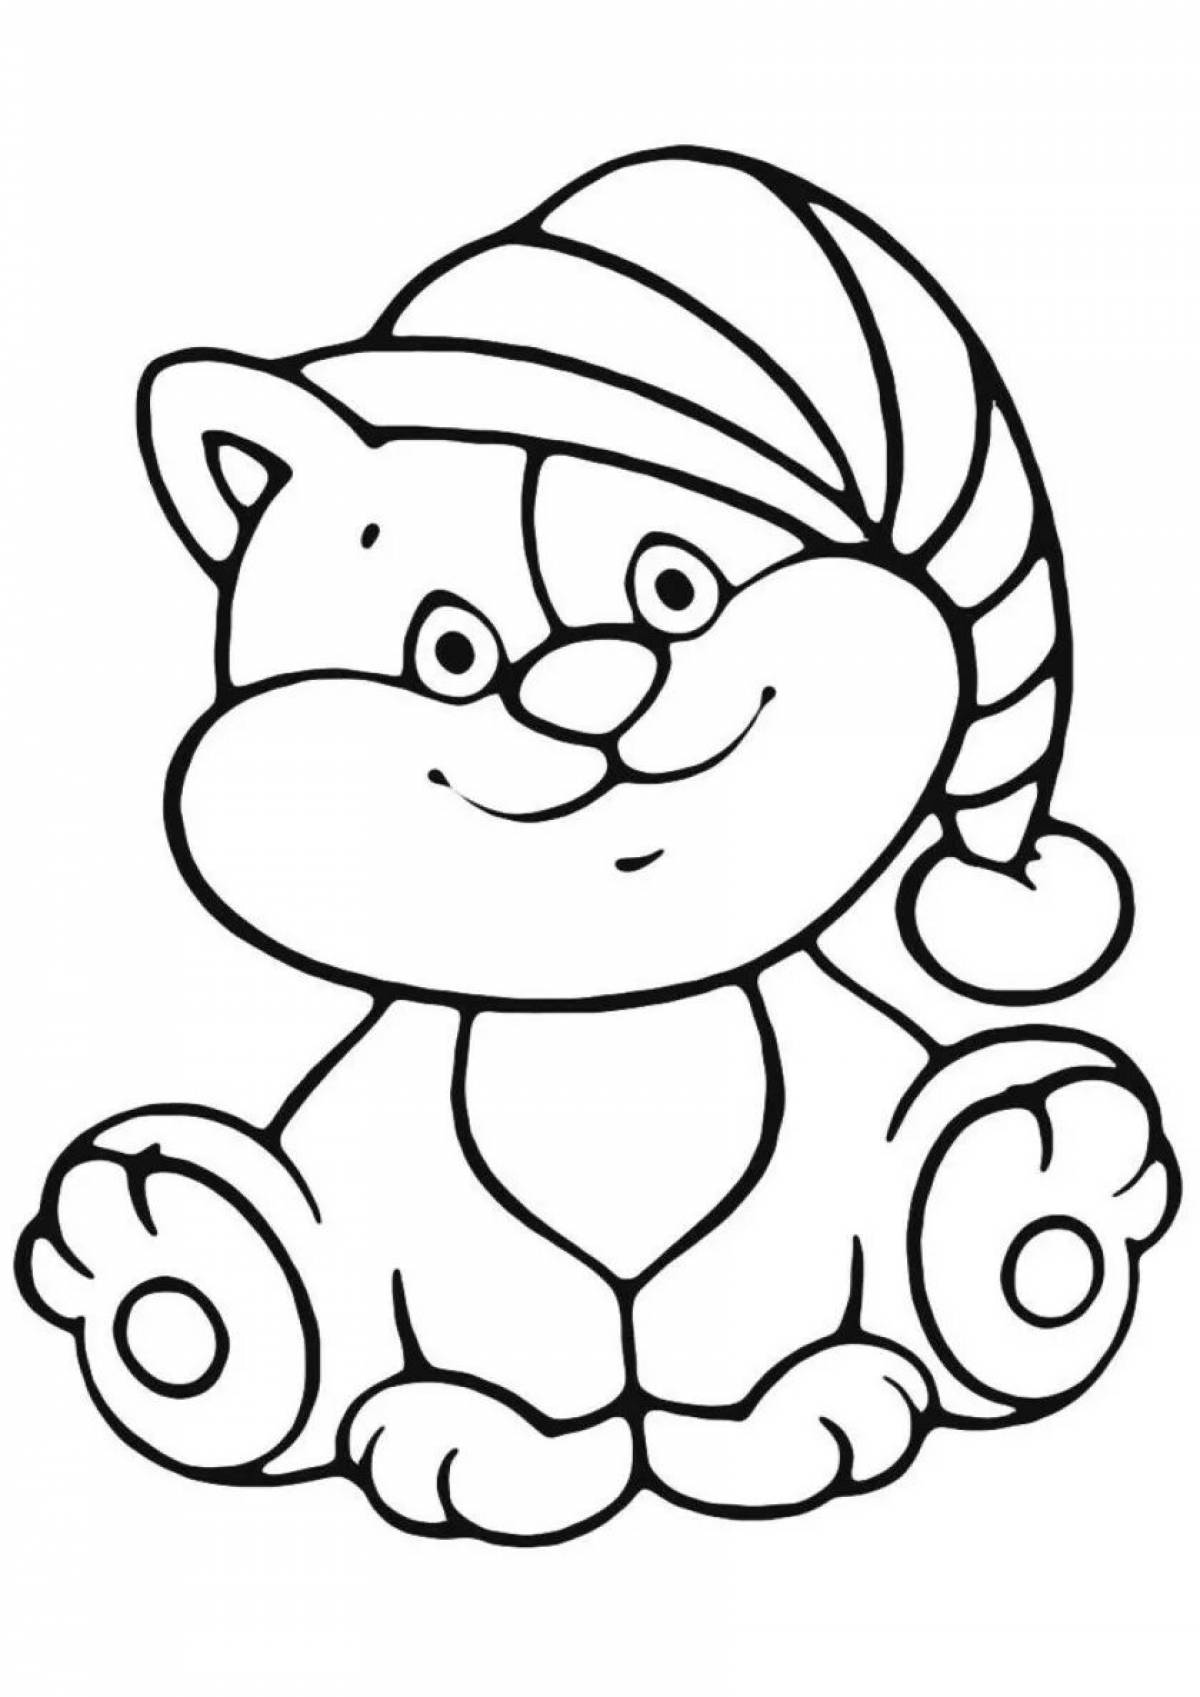 Coloring page strange cat in a hat